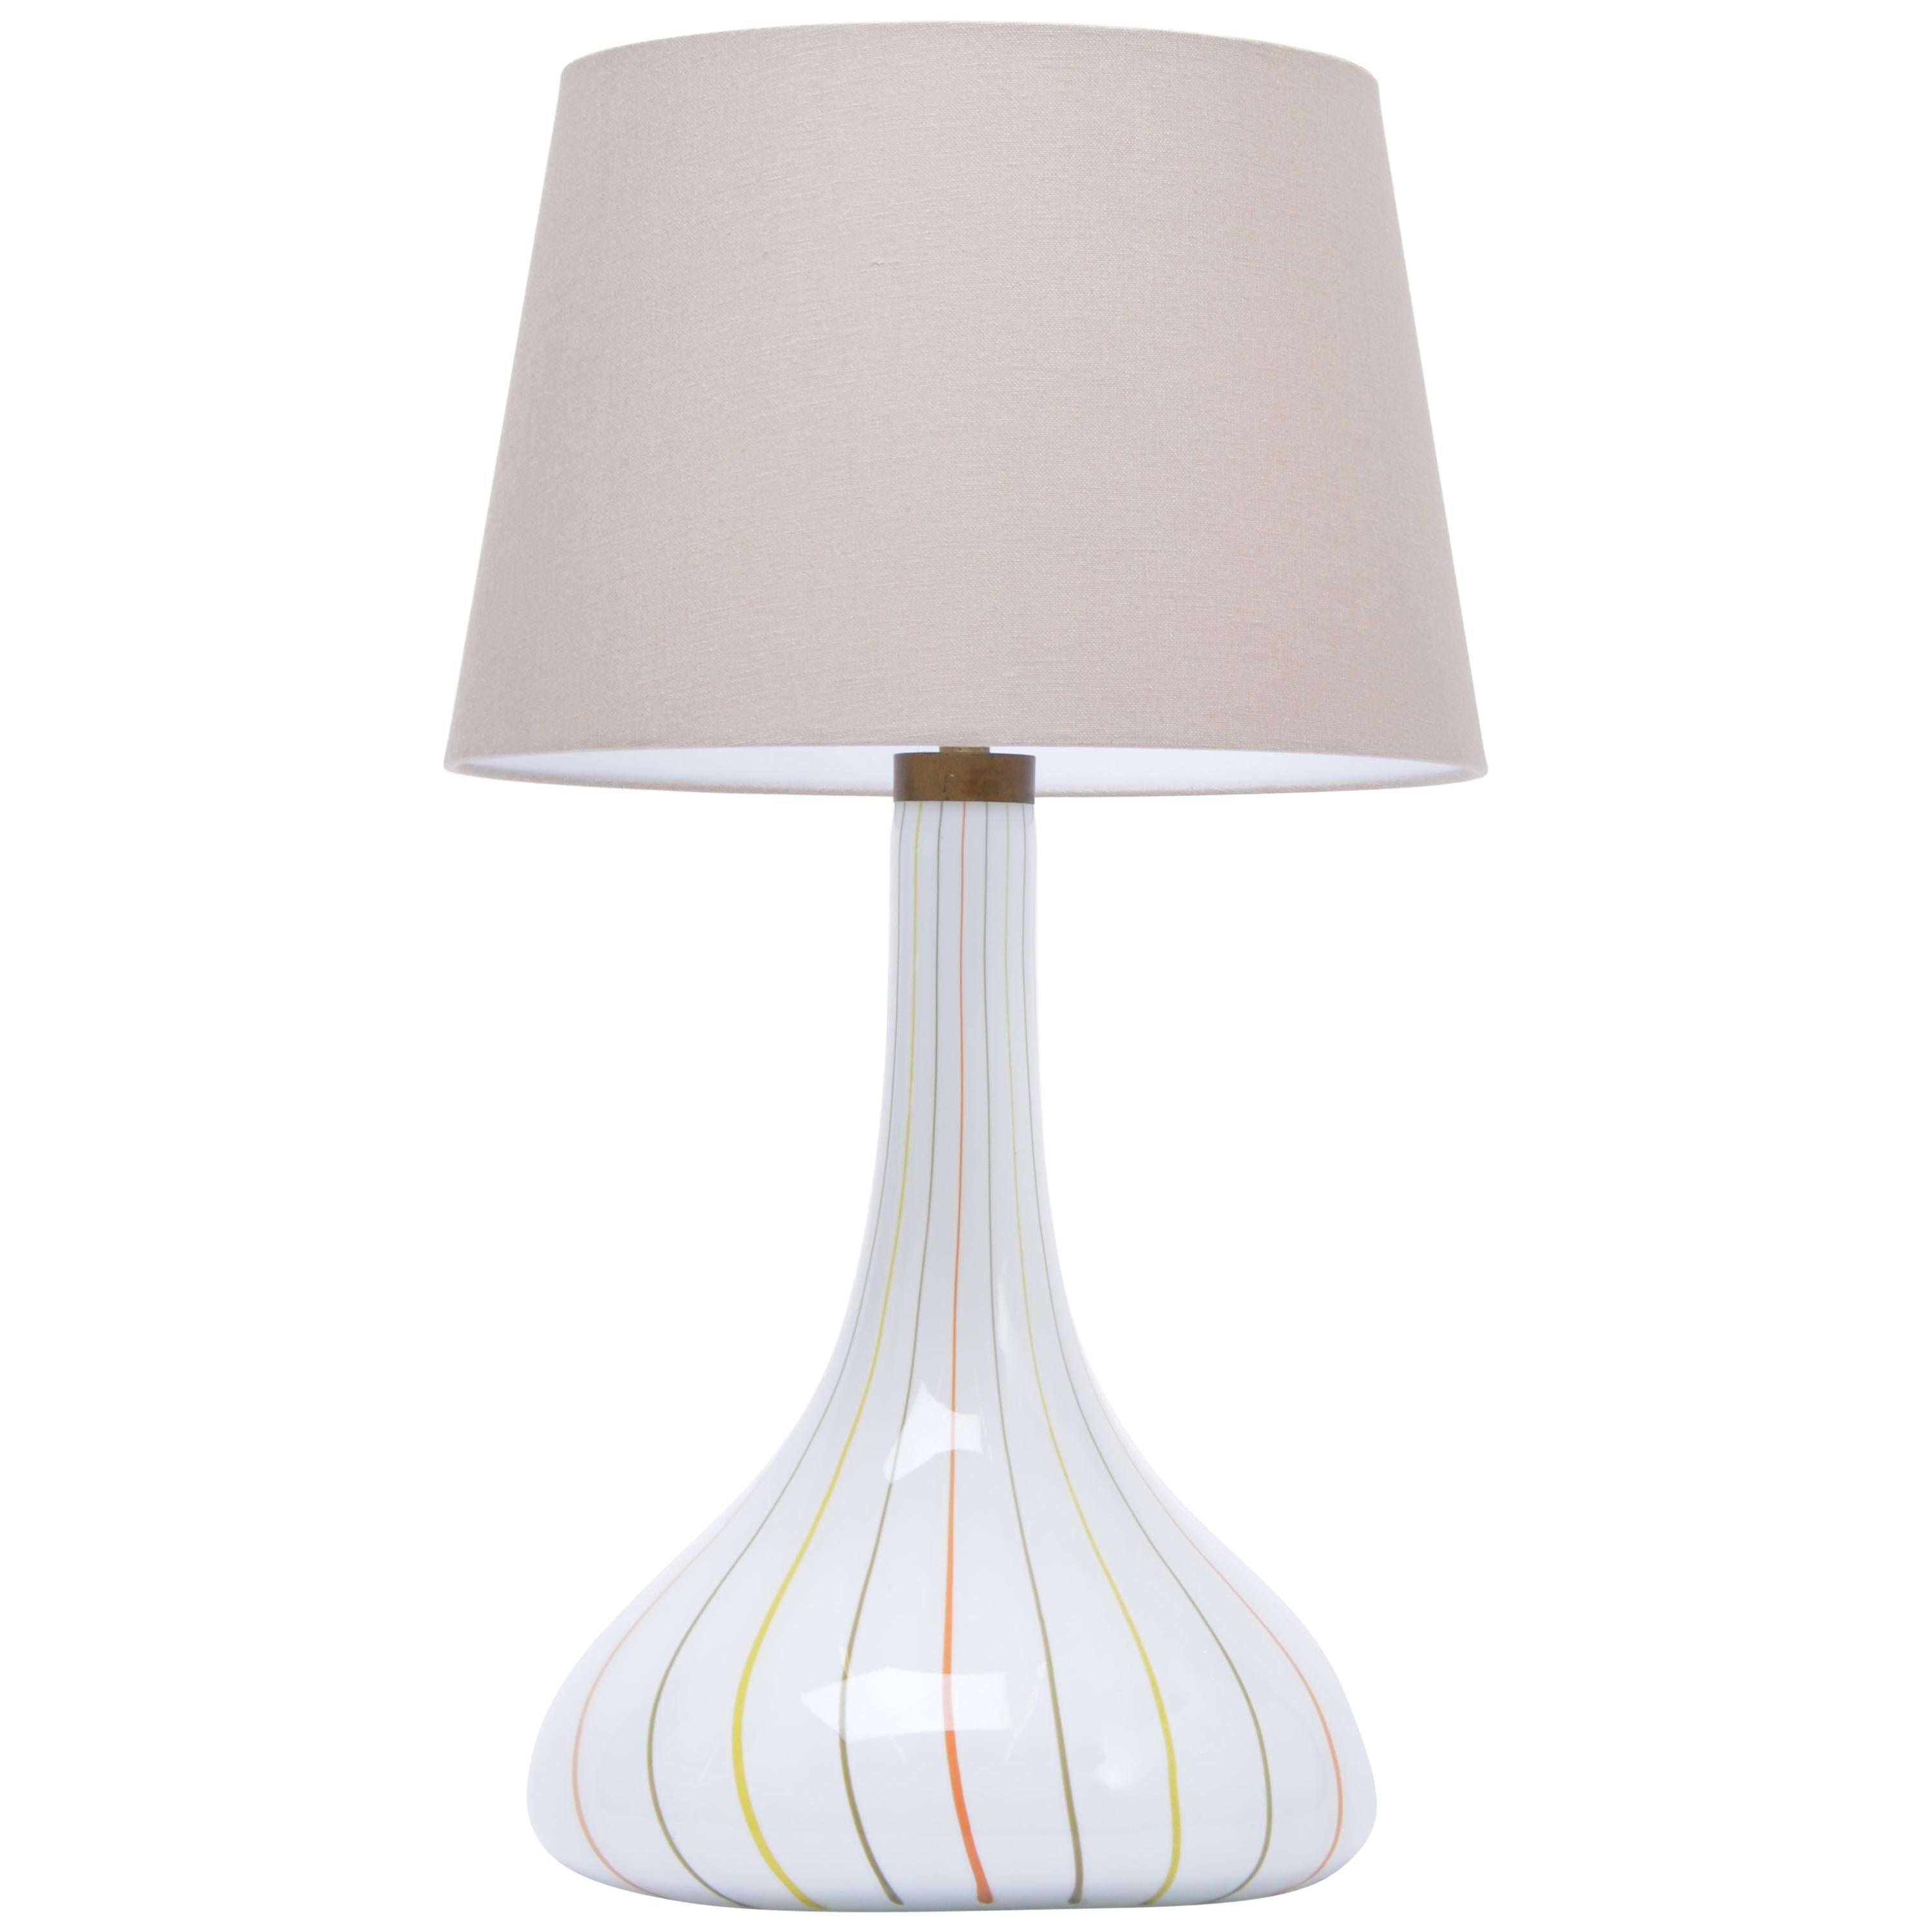 Tall White Glass Table Lamp model "Candy" by Kylle Svanlund for Holmegaard